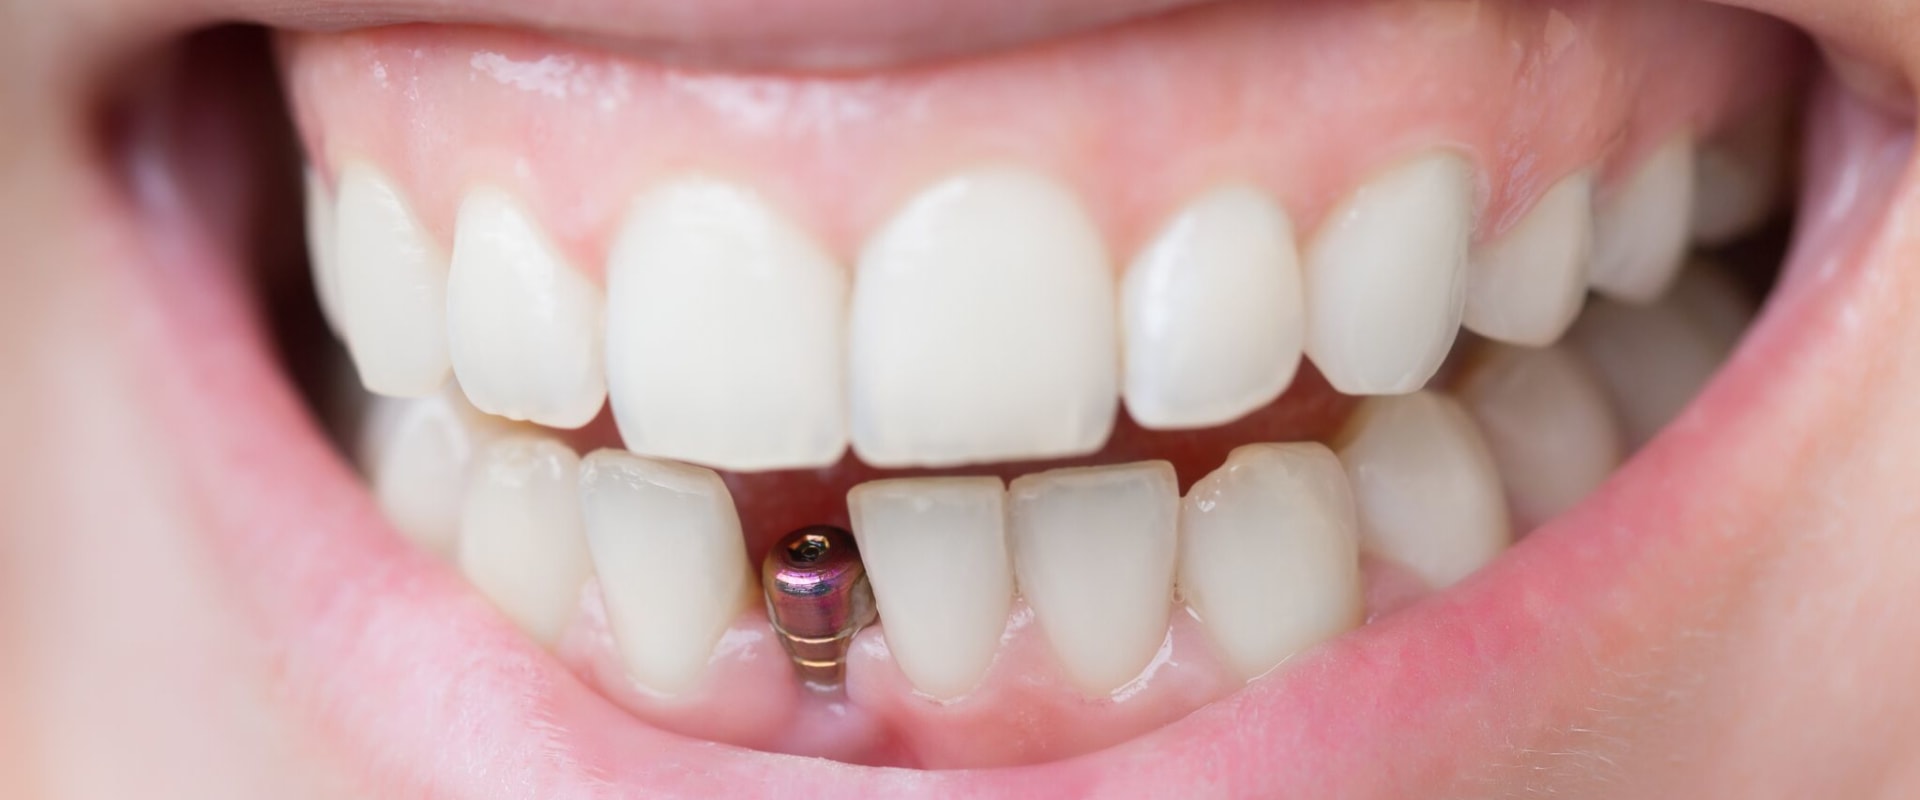 Where does the bone come from for dental implants?